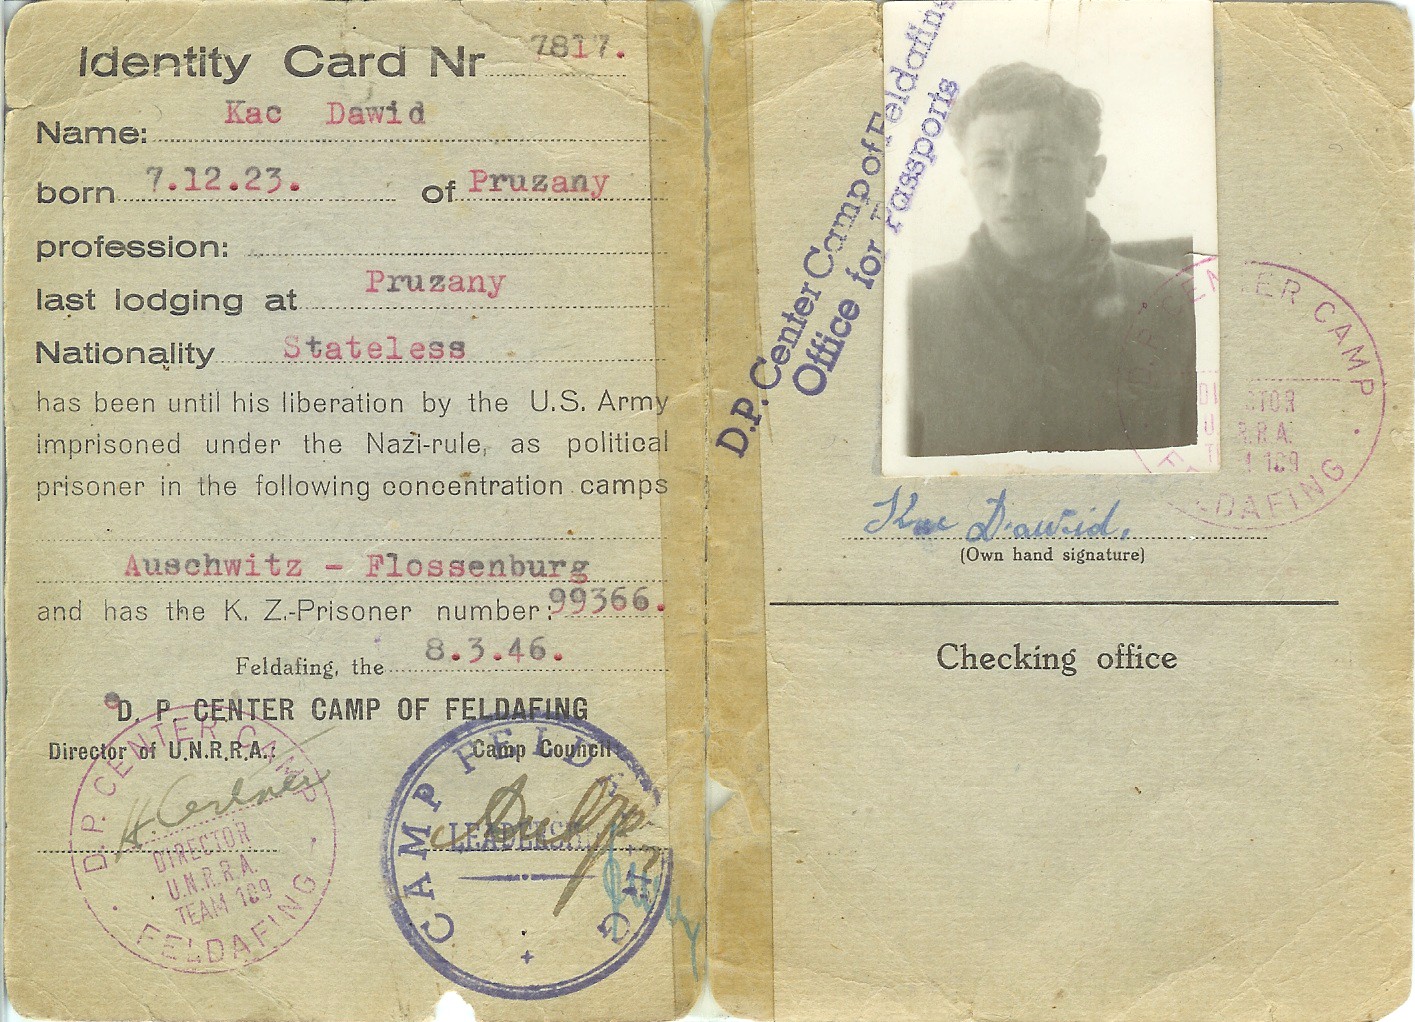 David's Displaced Persons Card